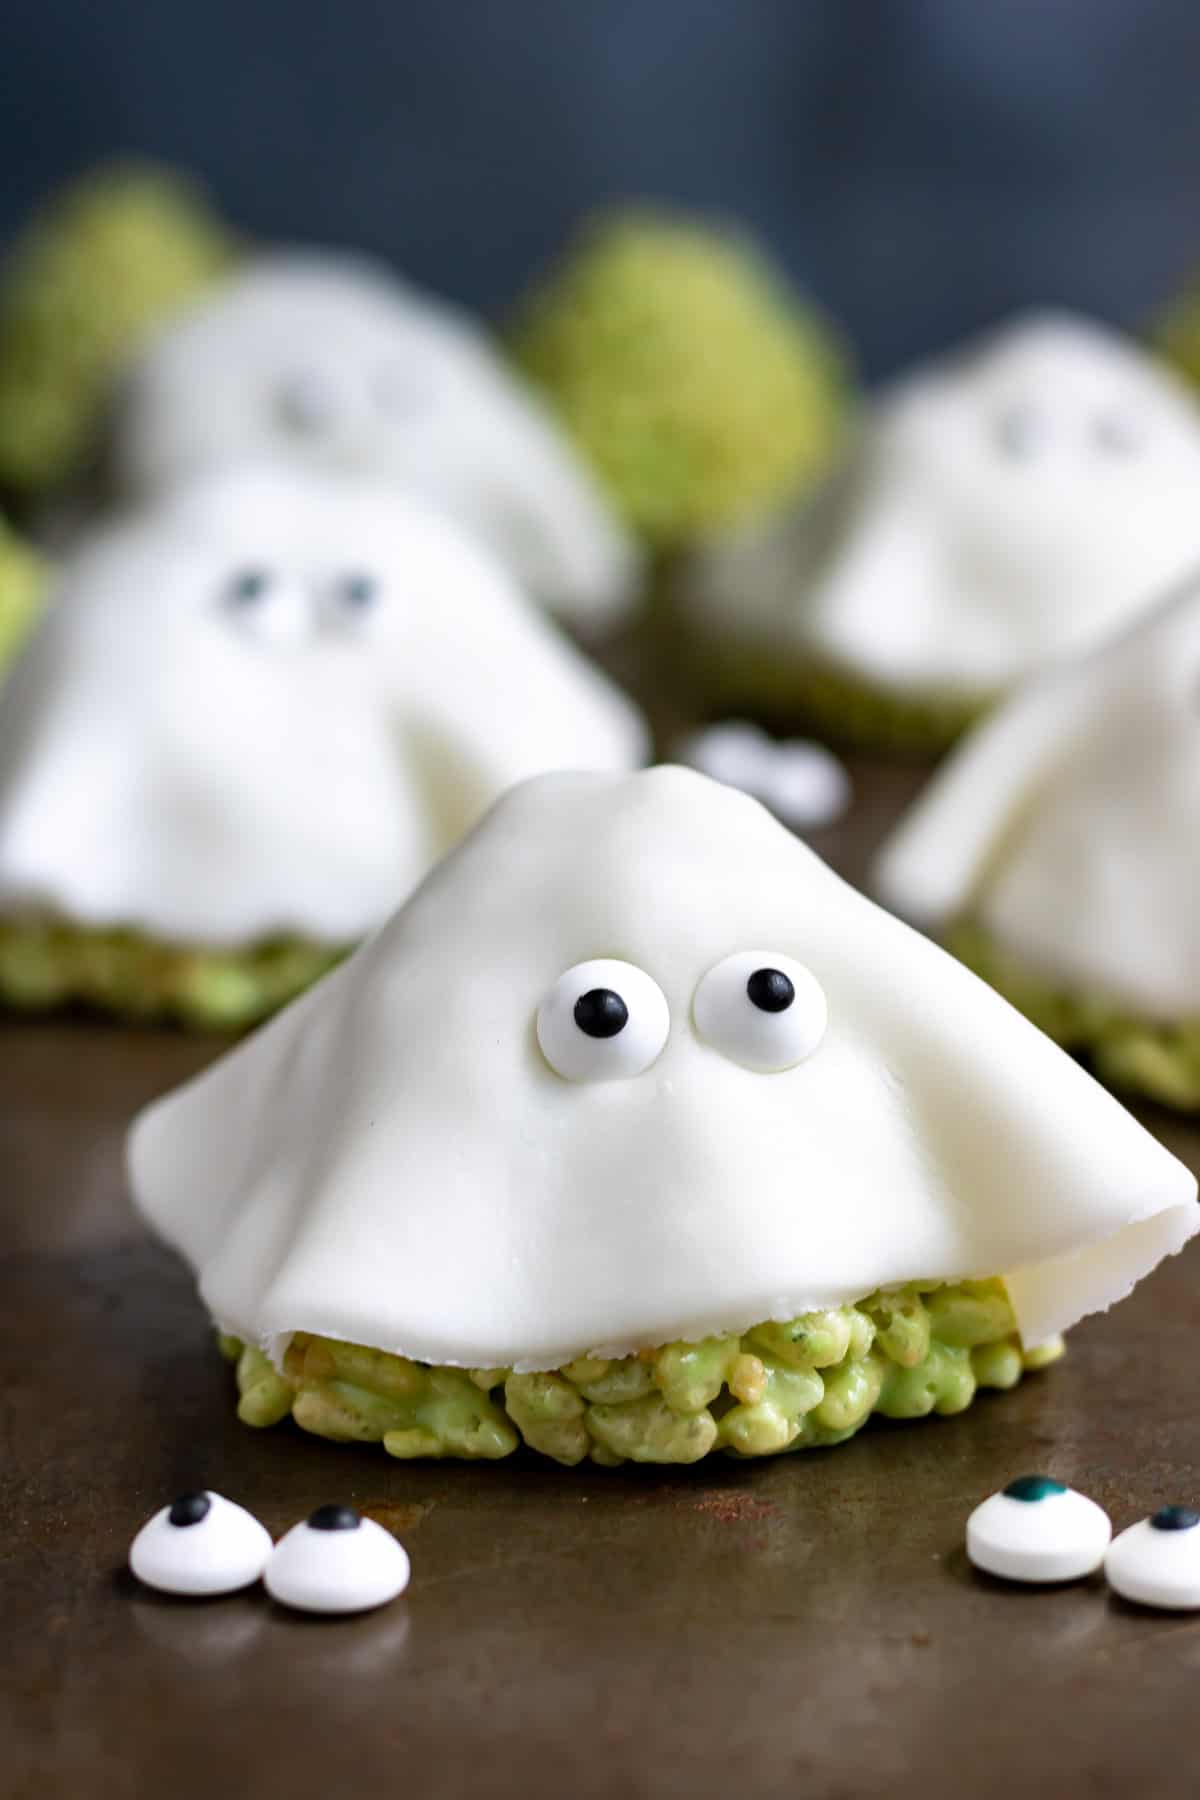 A rice krispie treat draped in white fondant with candy eyes - to look like a ghost.